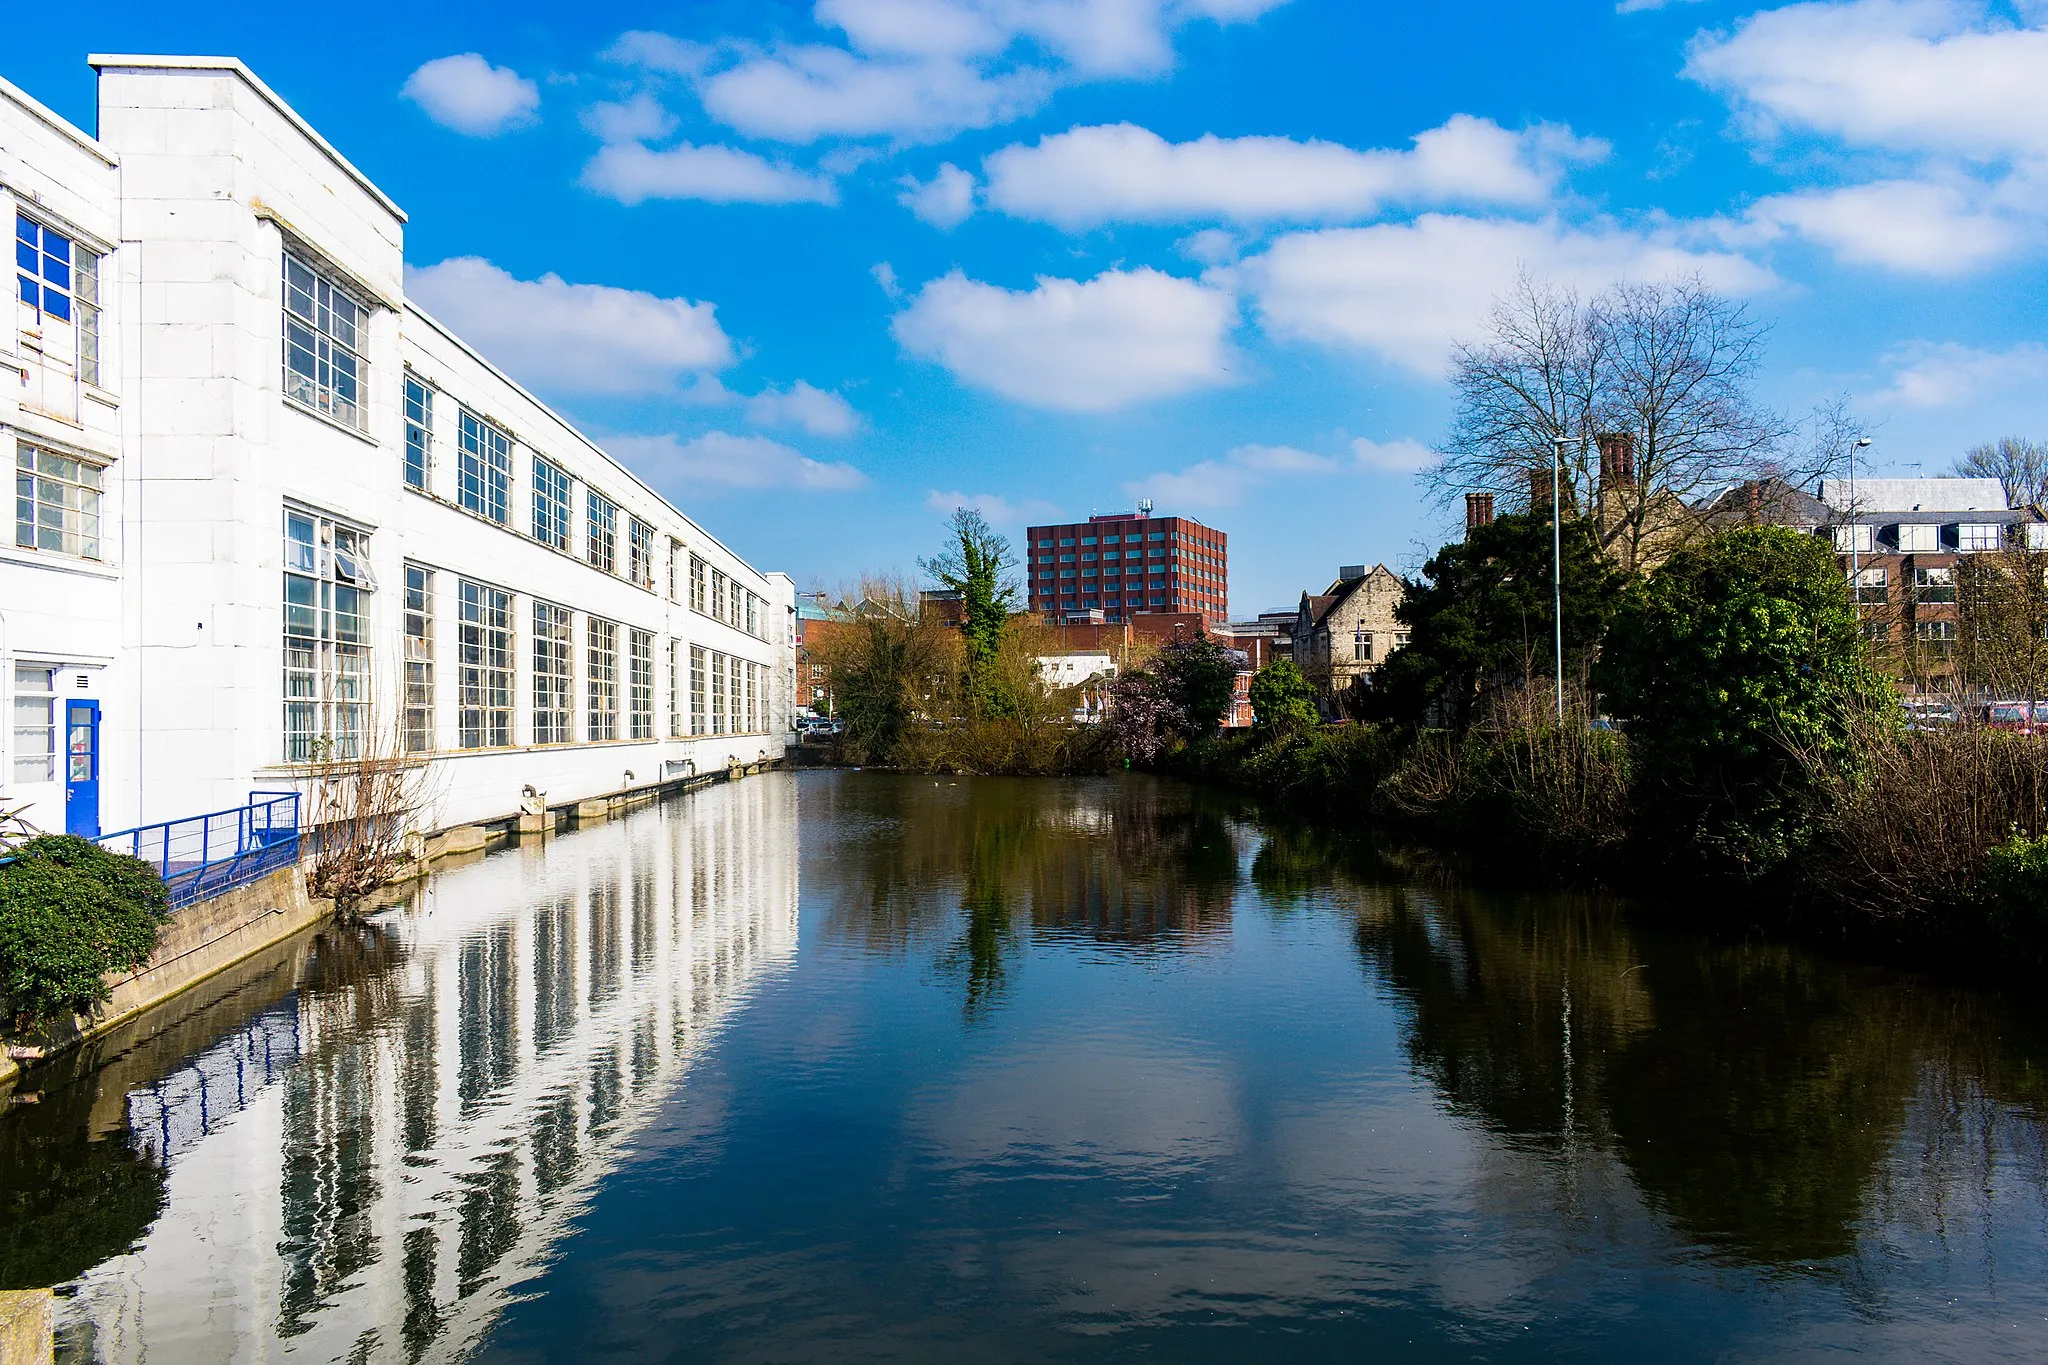 Photo showing: The River Len in Maidstone, flowing into the River Medway behind me.